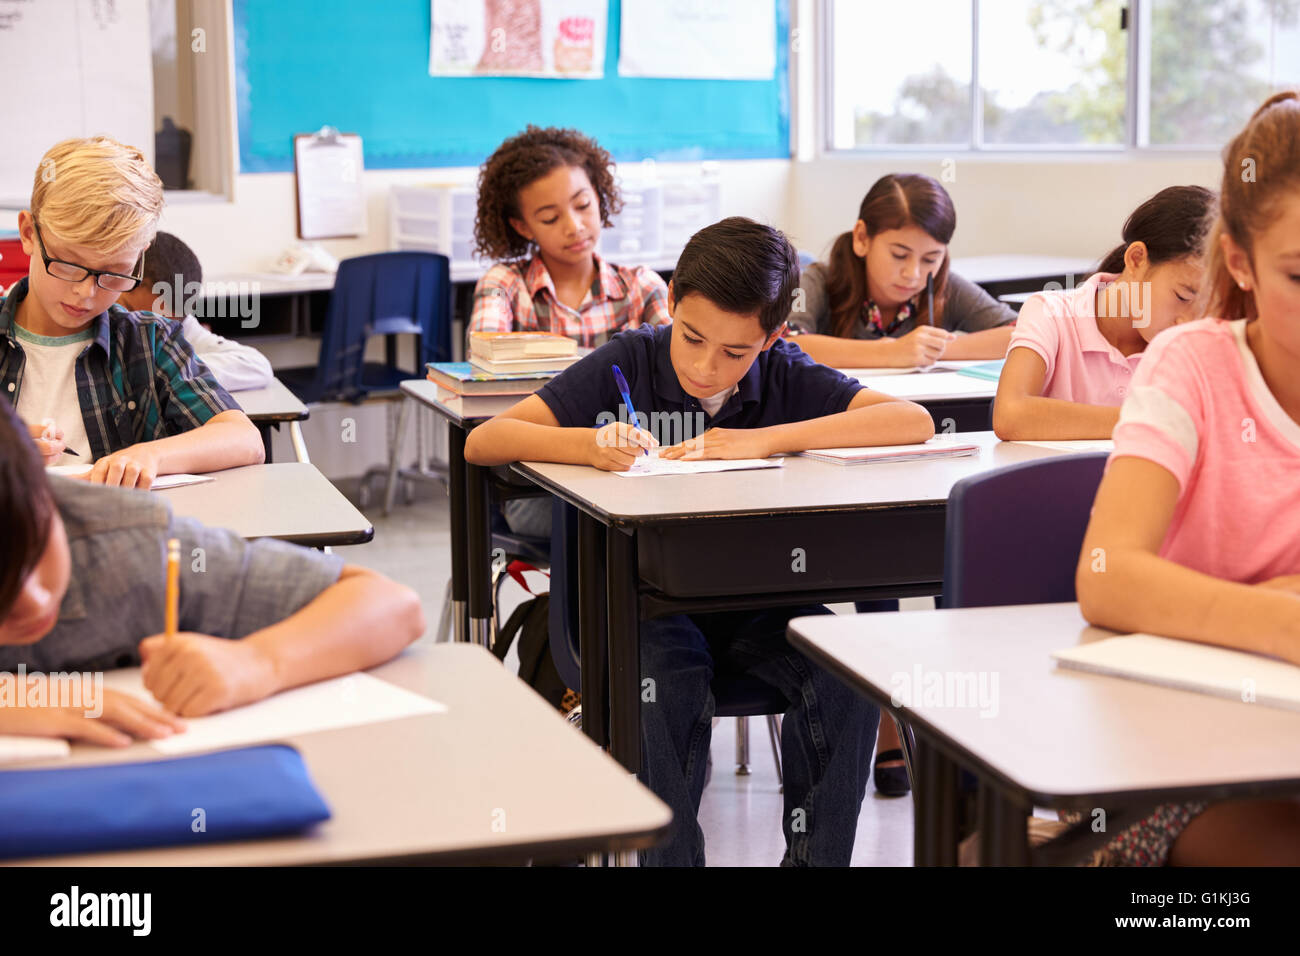 Elementary school kids working at their desks in a classroom Stock Photo